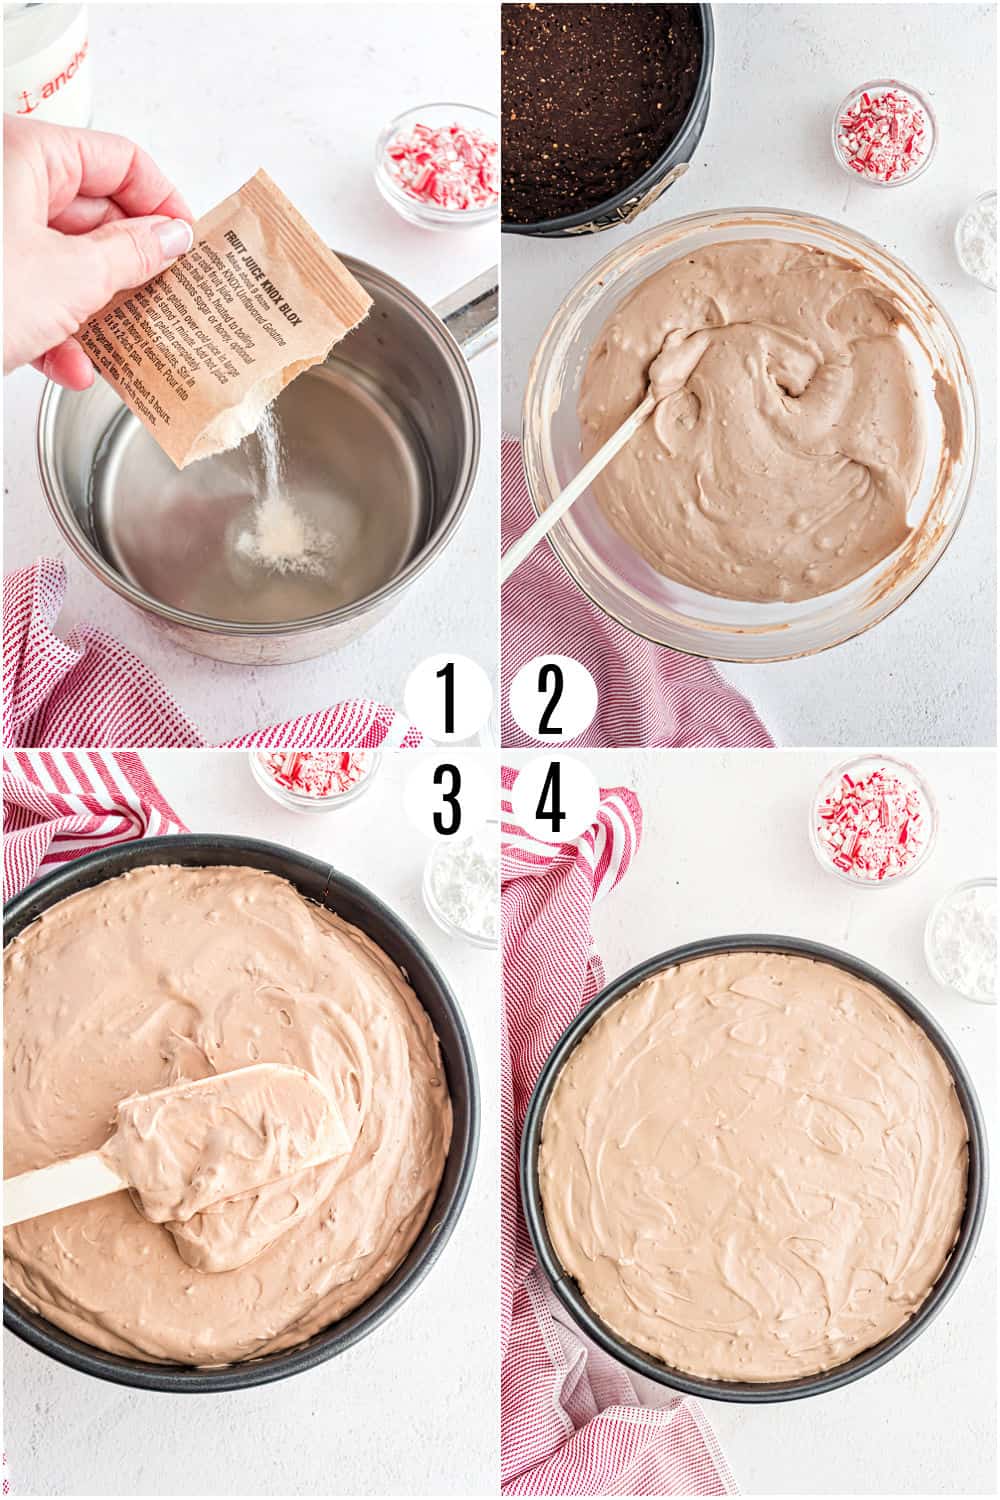 Step by step photos showing how to make nutella mousse pie.